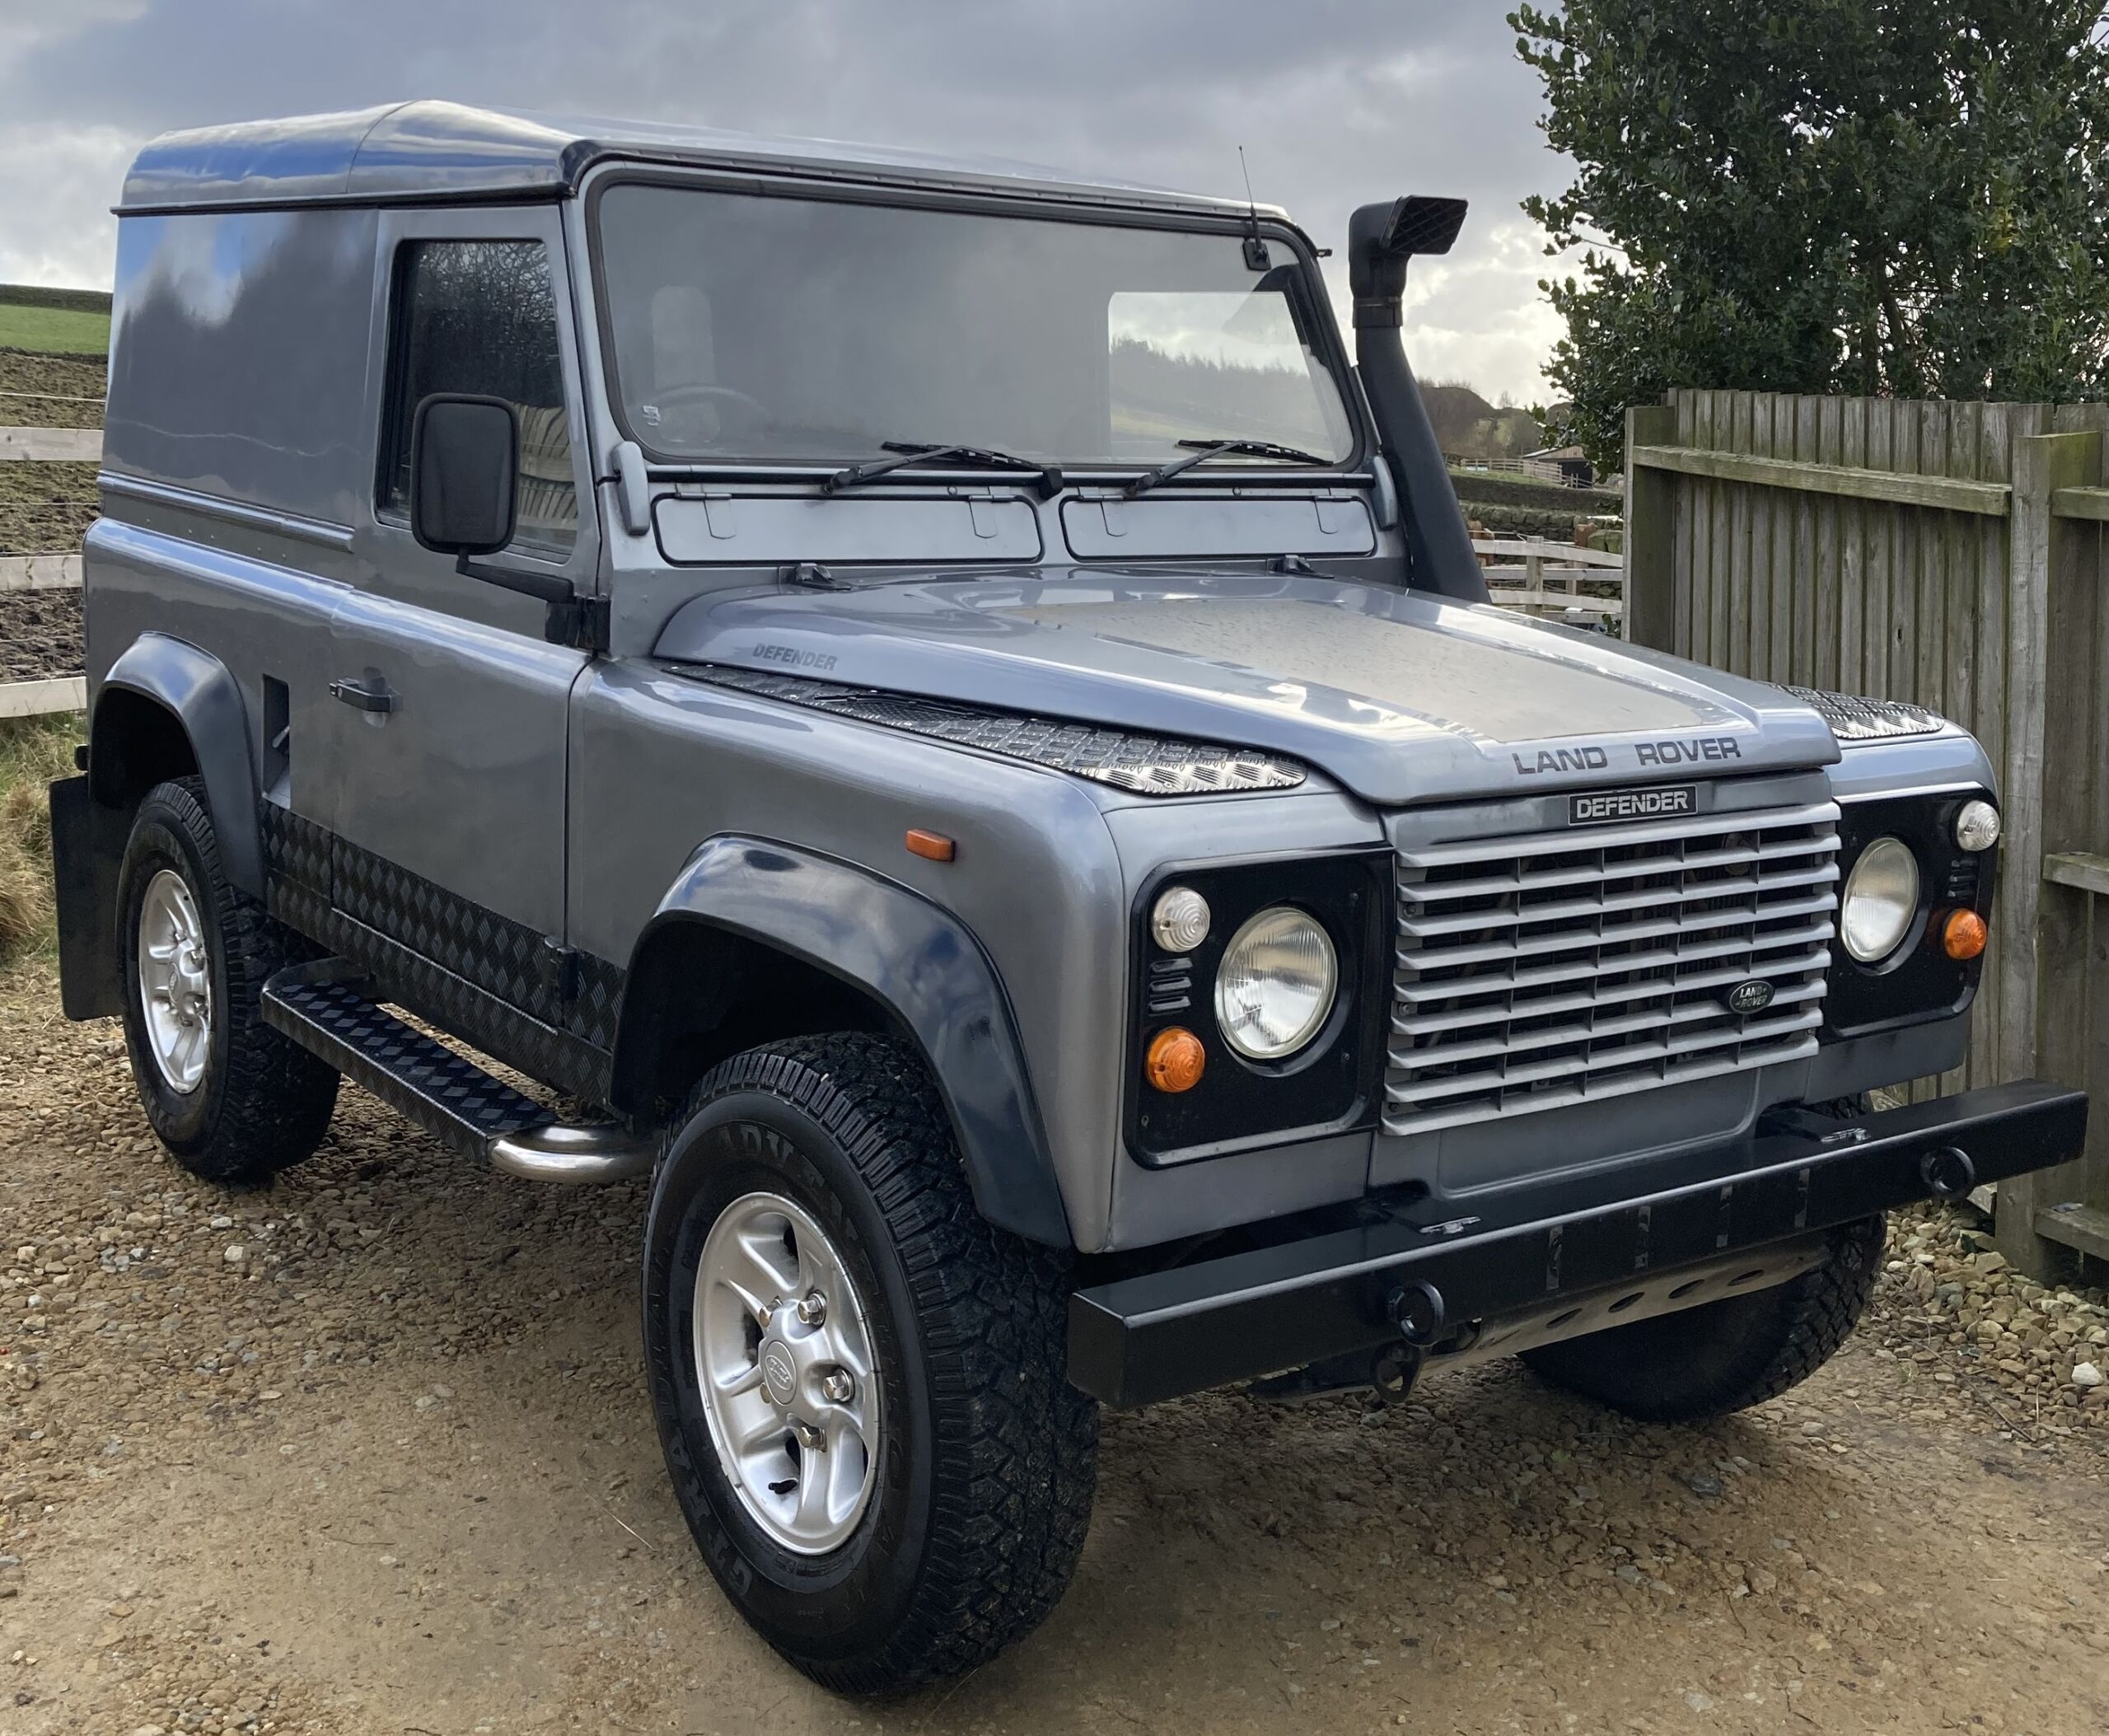 For Sale LAND ROVER 90 DEFENDER TDI HT in West Yorkshire